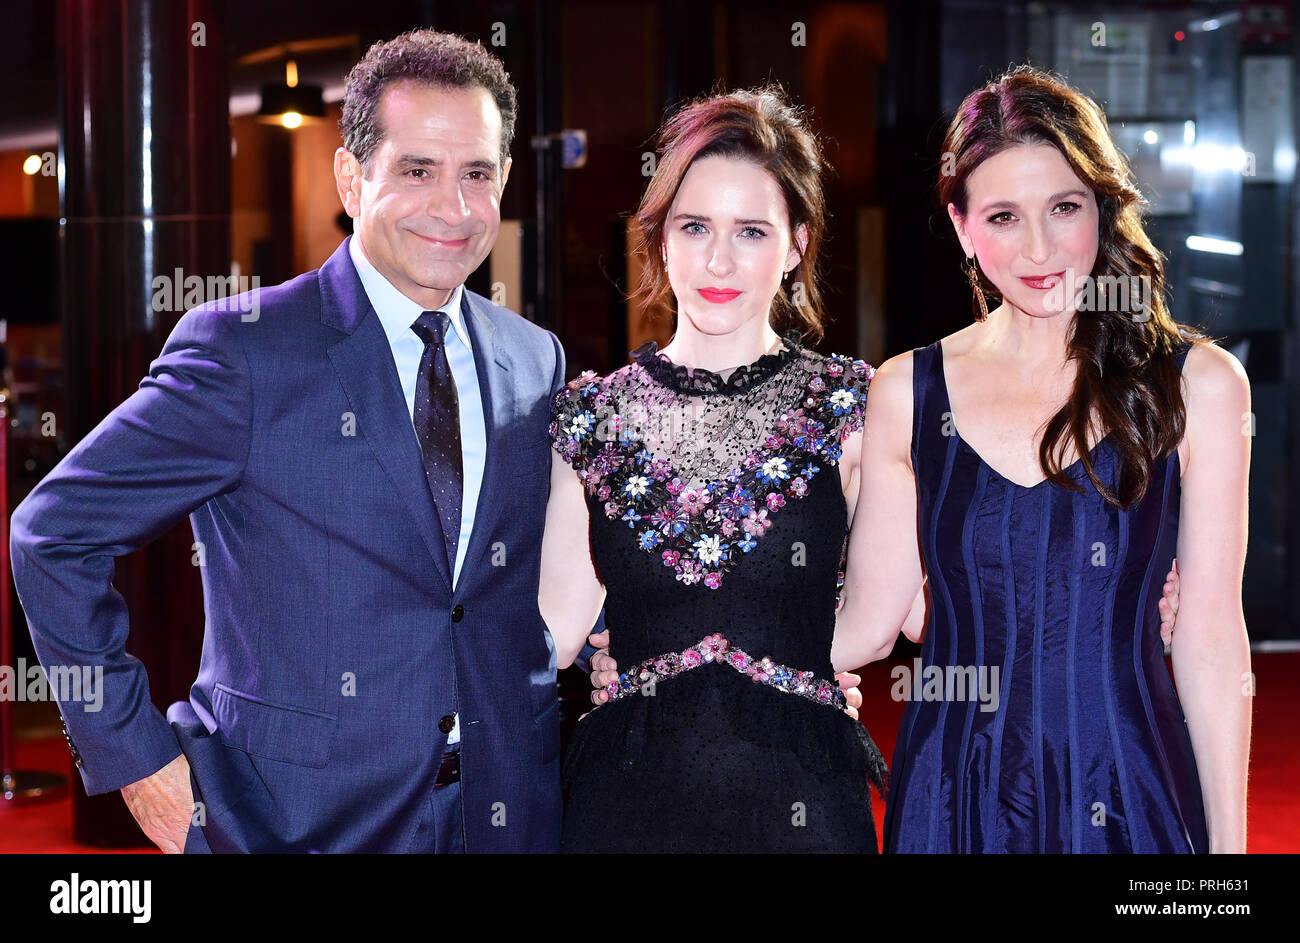 Tony Shalhoub (left-right) Rachel Brosnahan and Marin Hinkle attending the world premiere of The Romanoffs at The Curzon Mayfair in London. Stock Photo